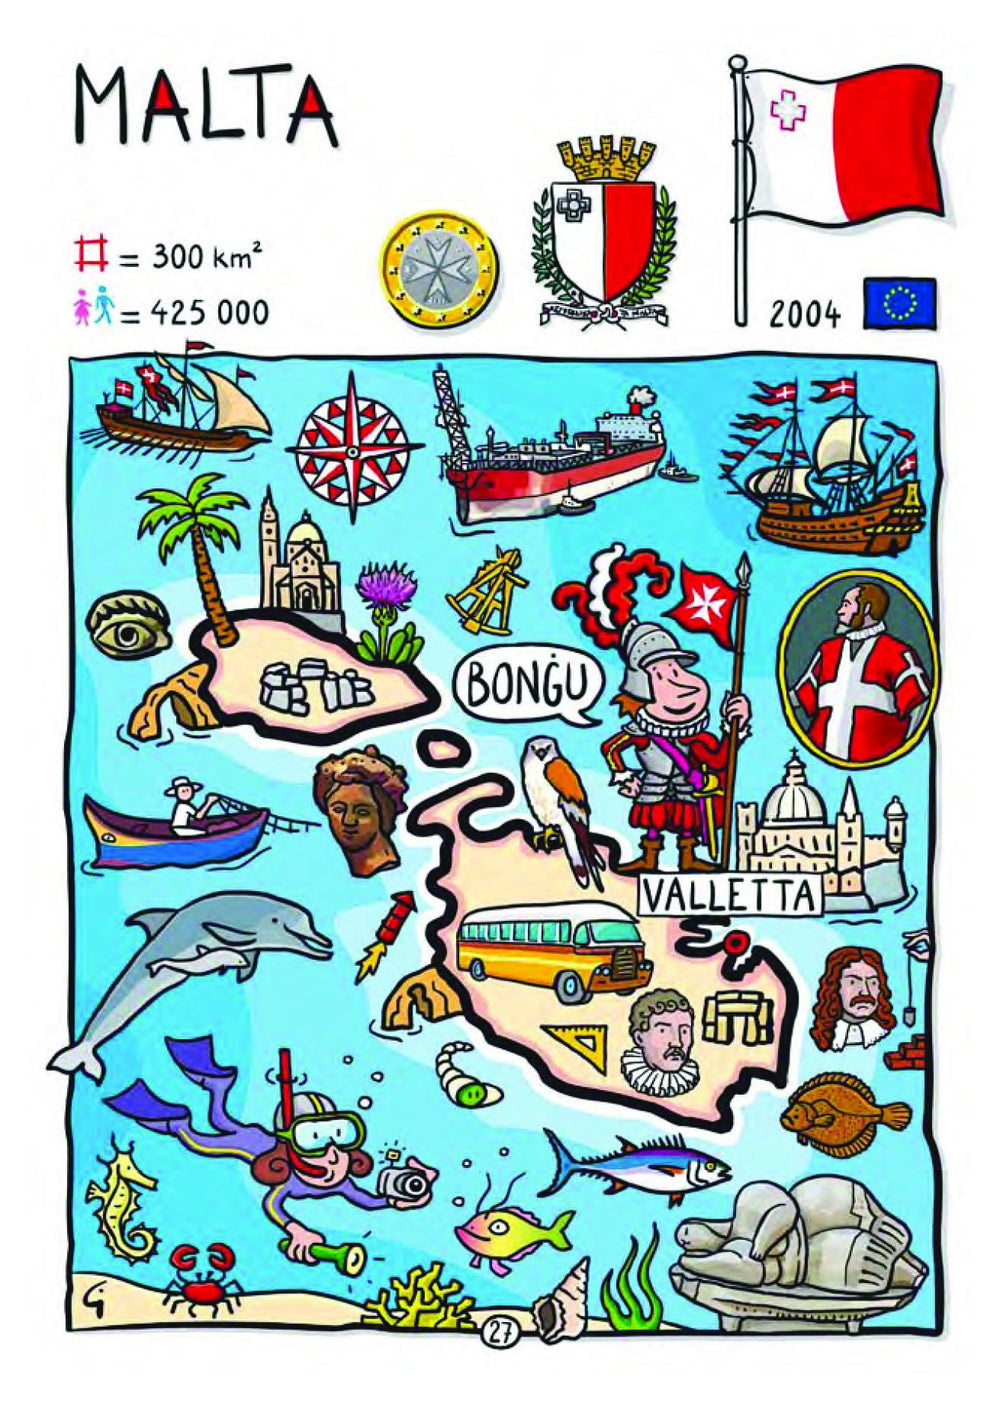 EU - United in Diversity - Malta_22 - top quality approved by www.postcardsmarket.com specialists